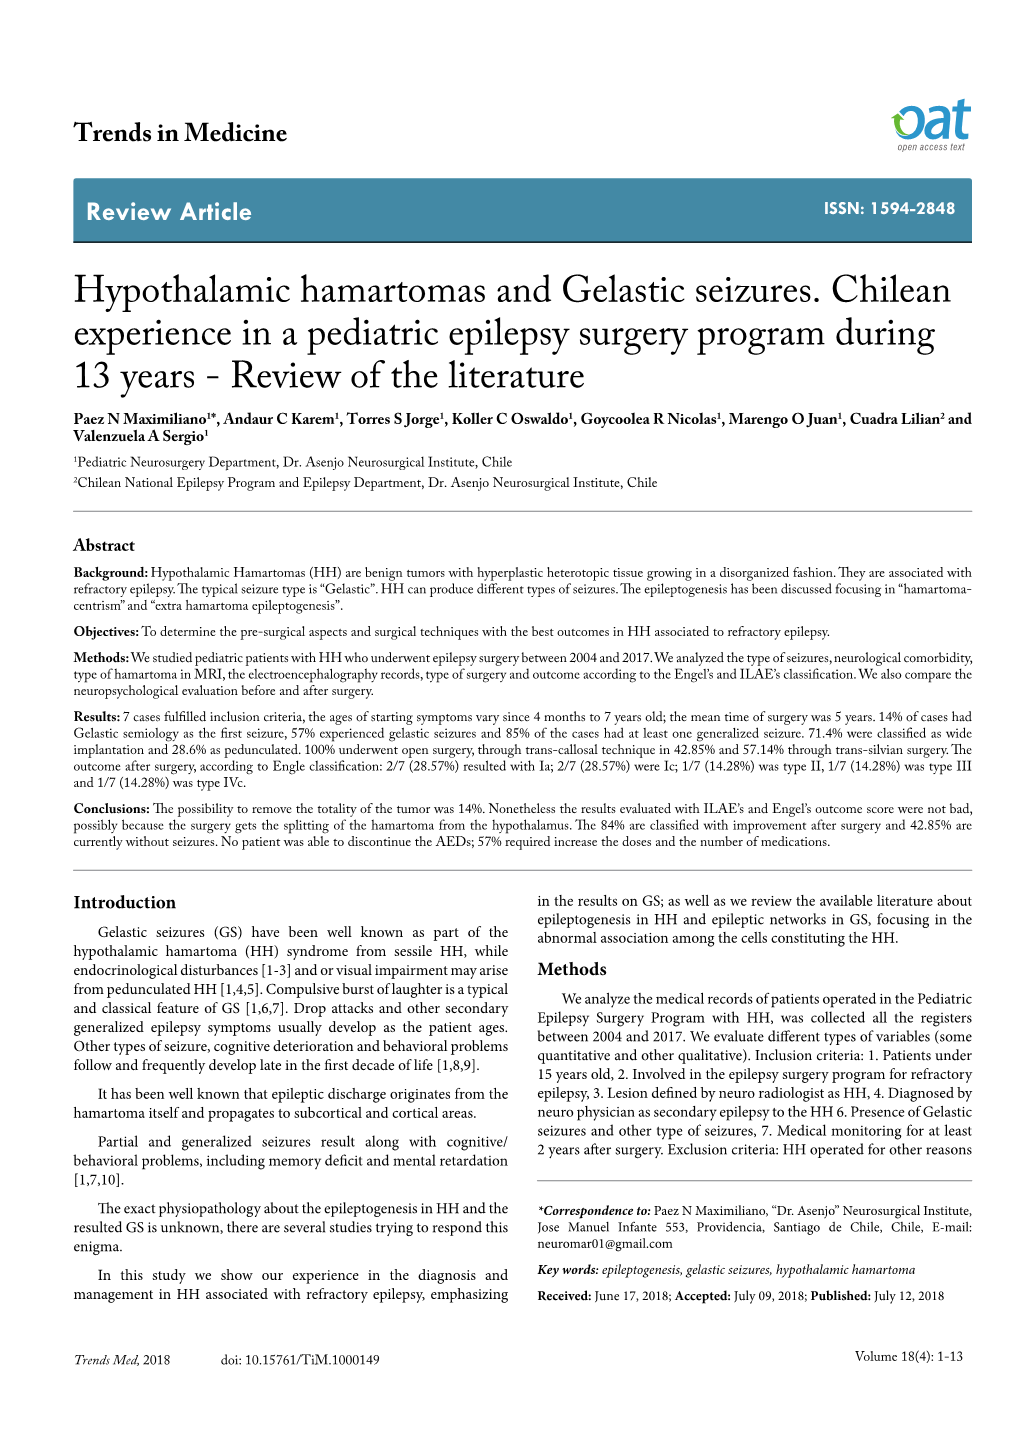 Hypothalamic Hamartomas and Gelastic Seizures. Chilean Experience in a Pediatric Epilepsy Surgery Program During 13 Years-Review of the Literature